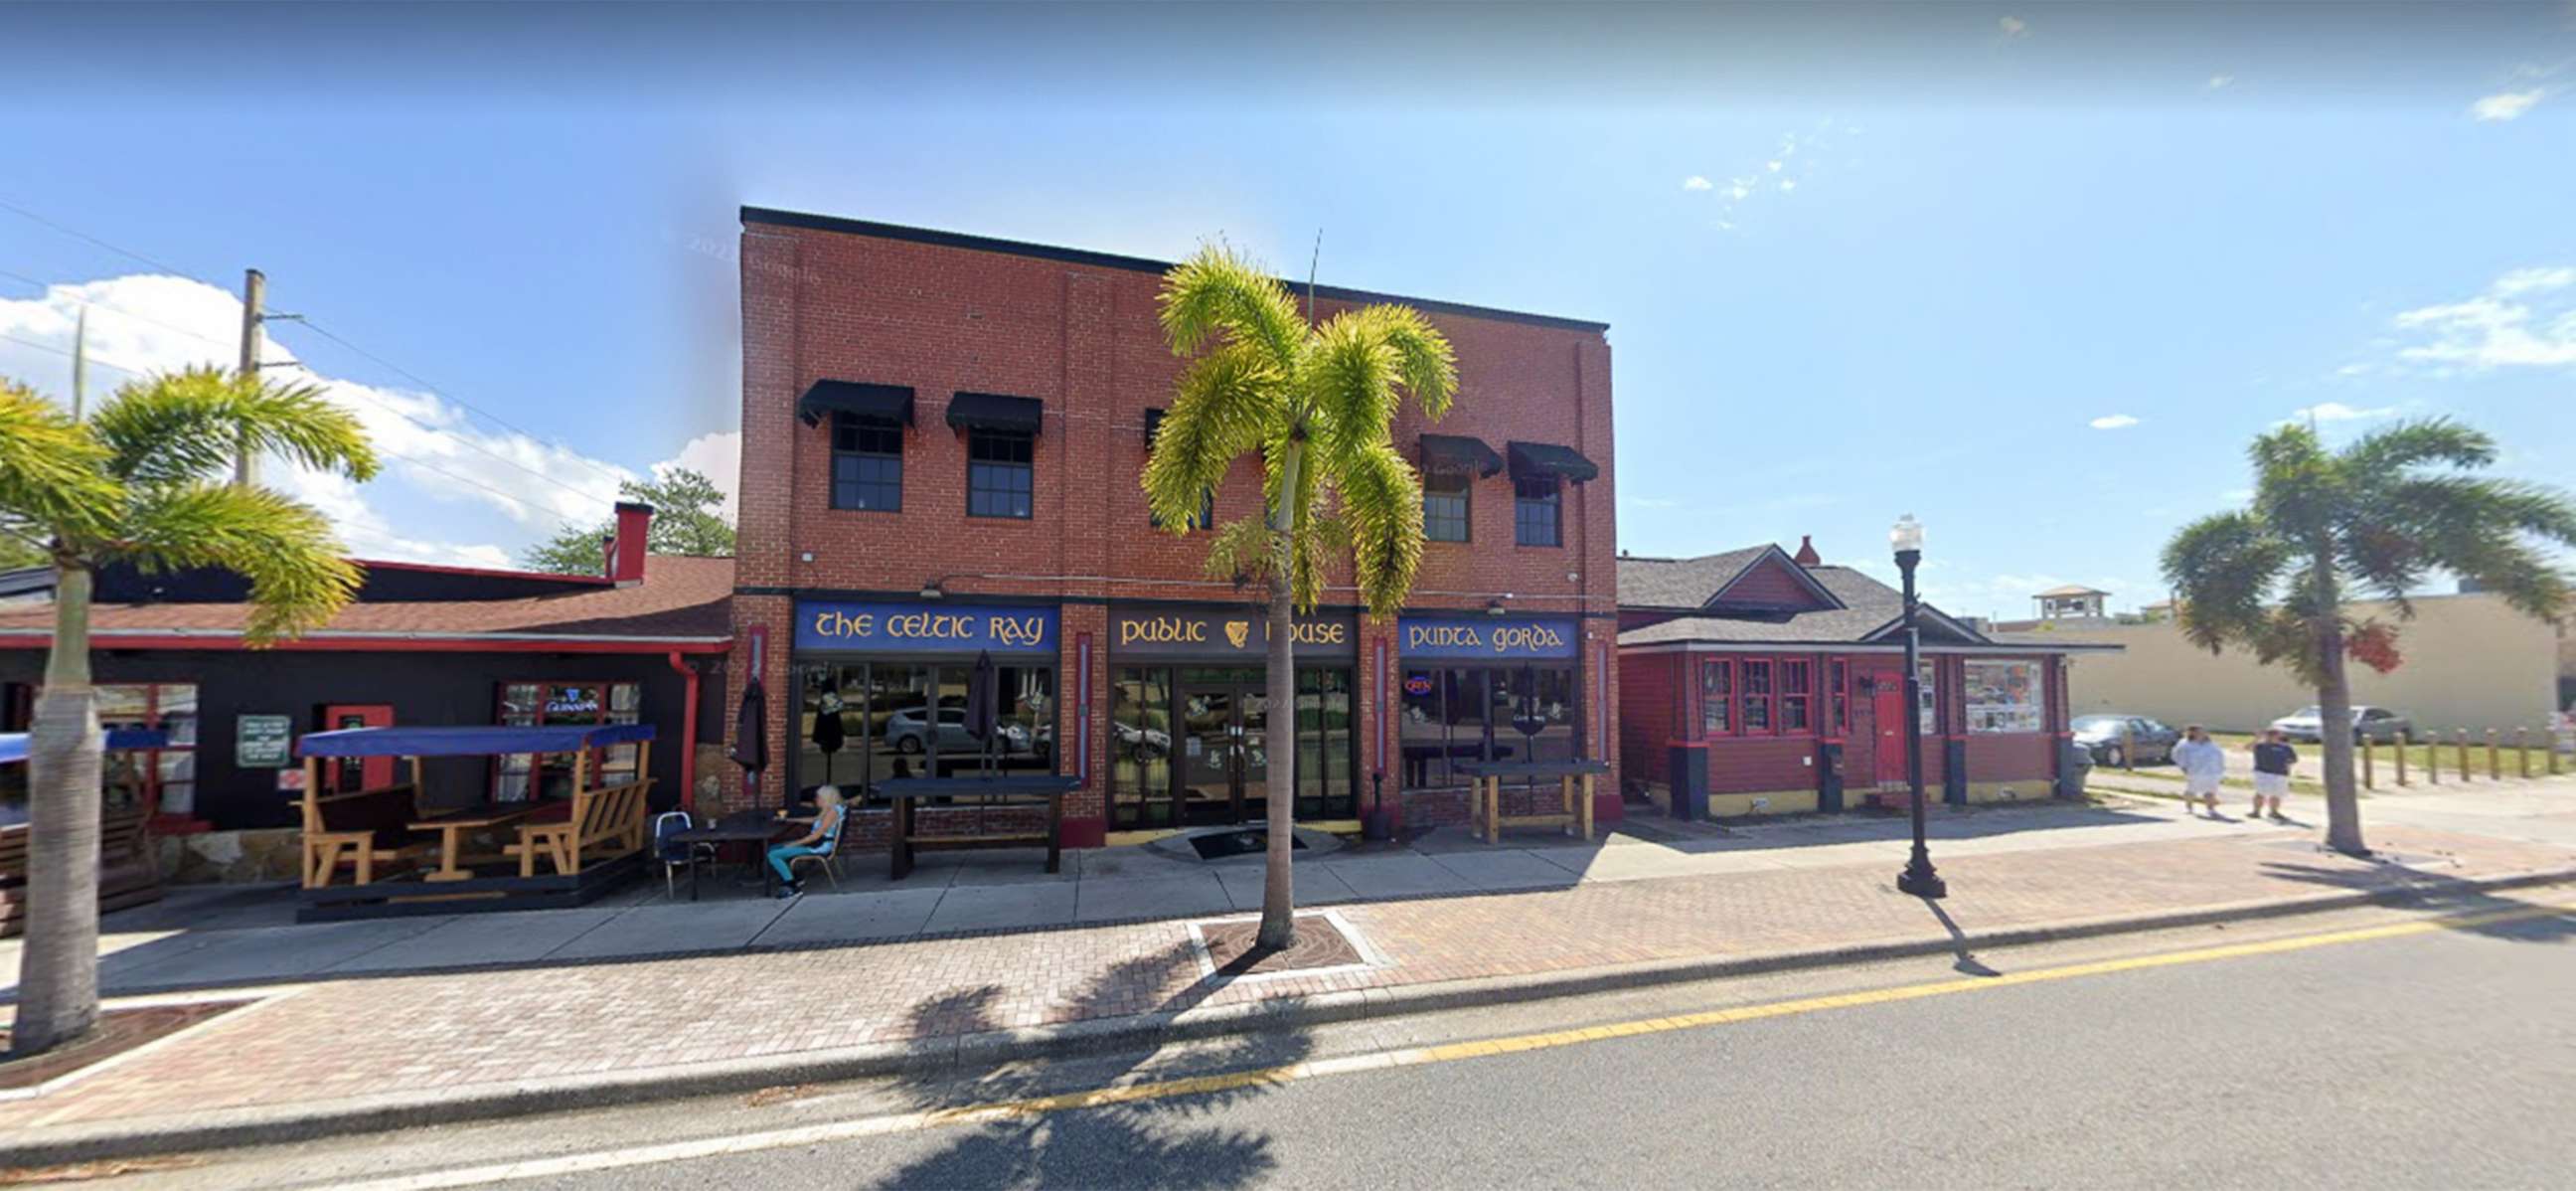 PHOTO: The Celtic Ray Public House stands in Punta Gorda, Fla., in a streeet view from March 2022.